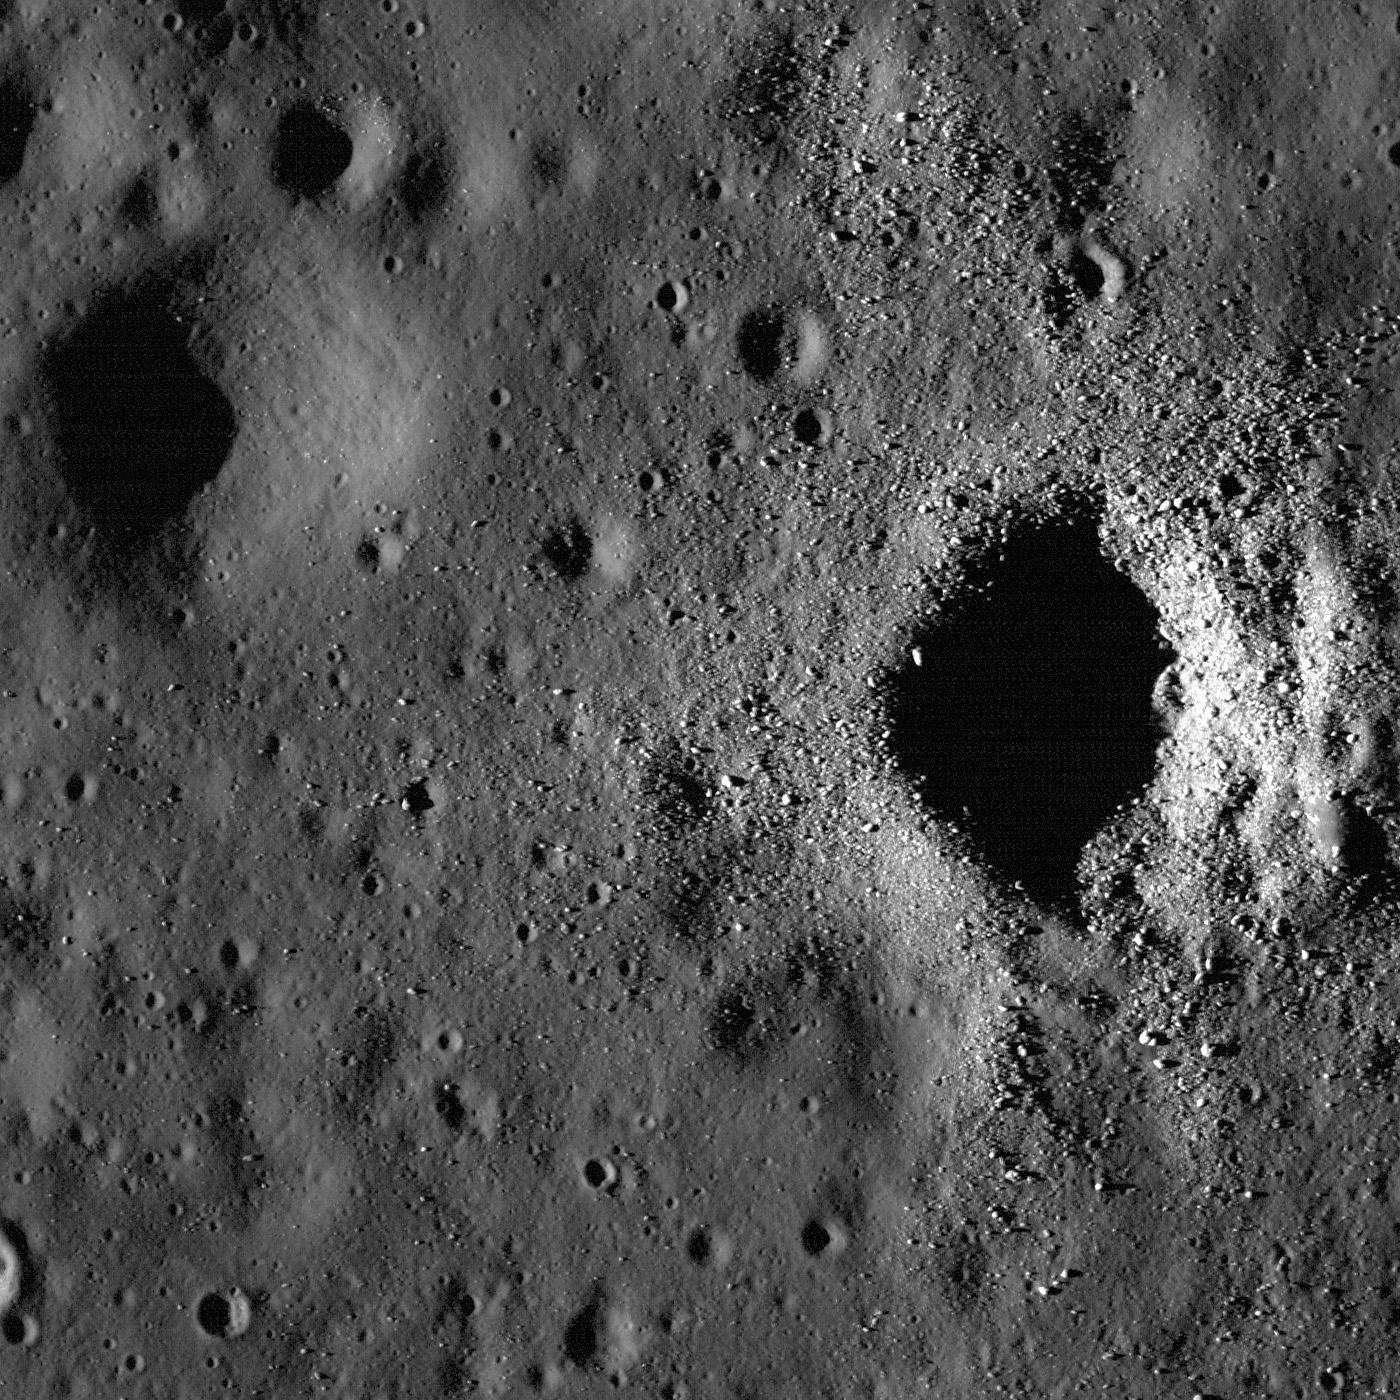 A crater in the “Sea of Storms” on the Moon